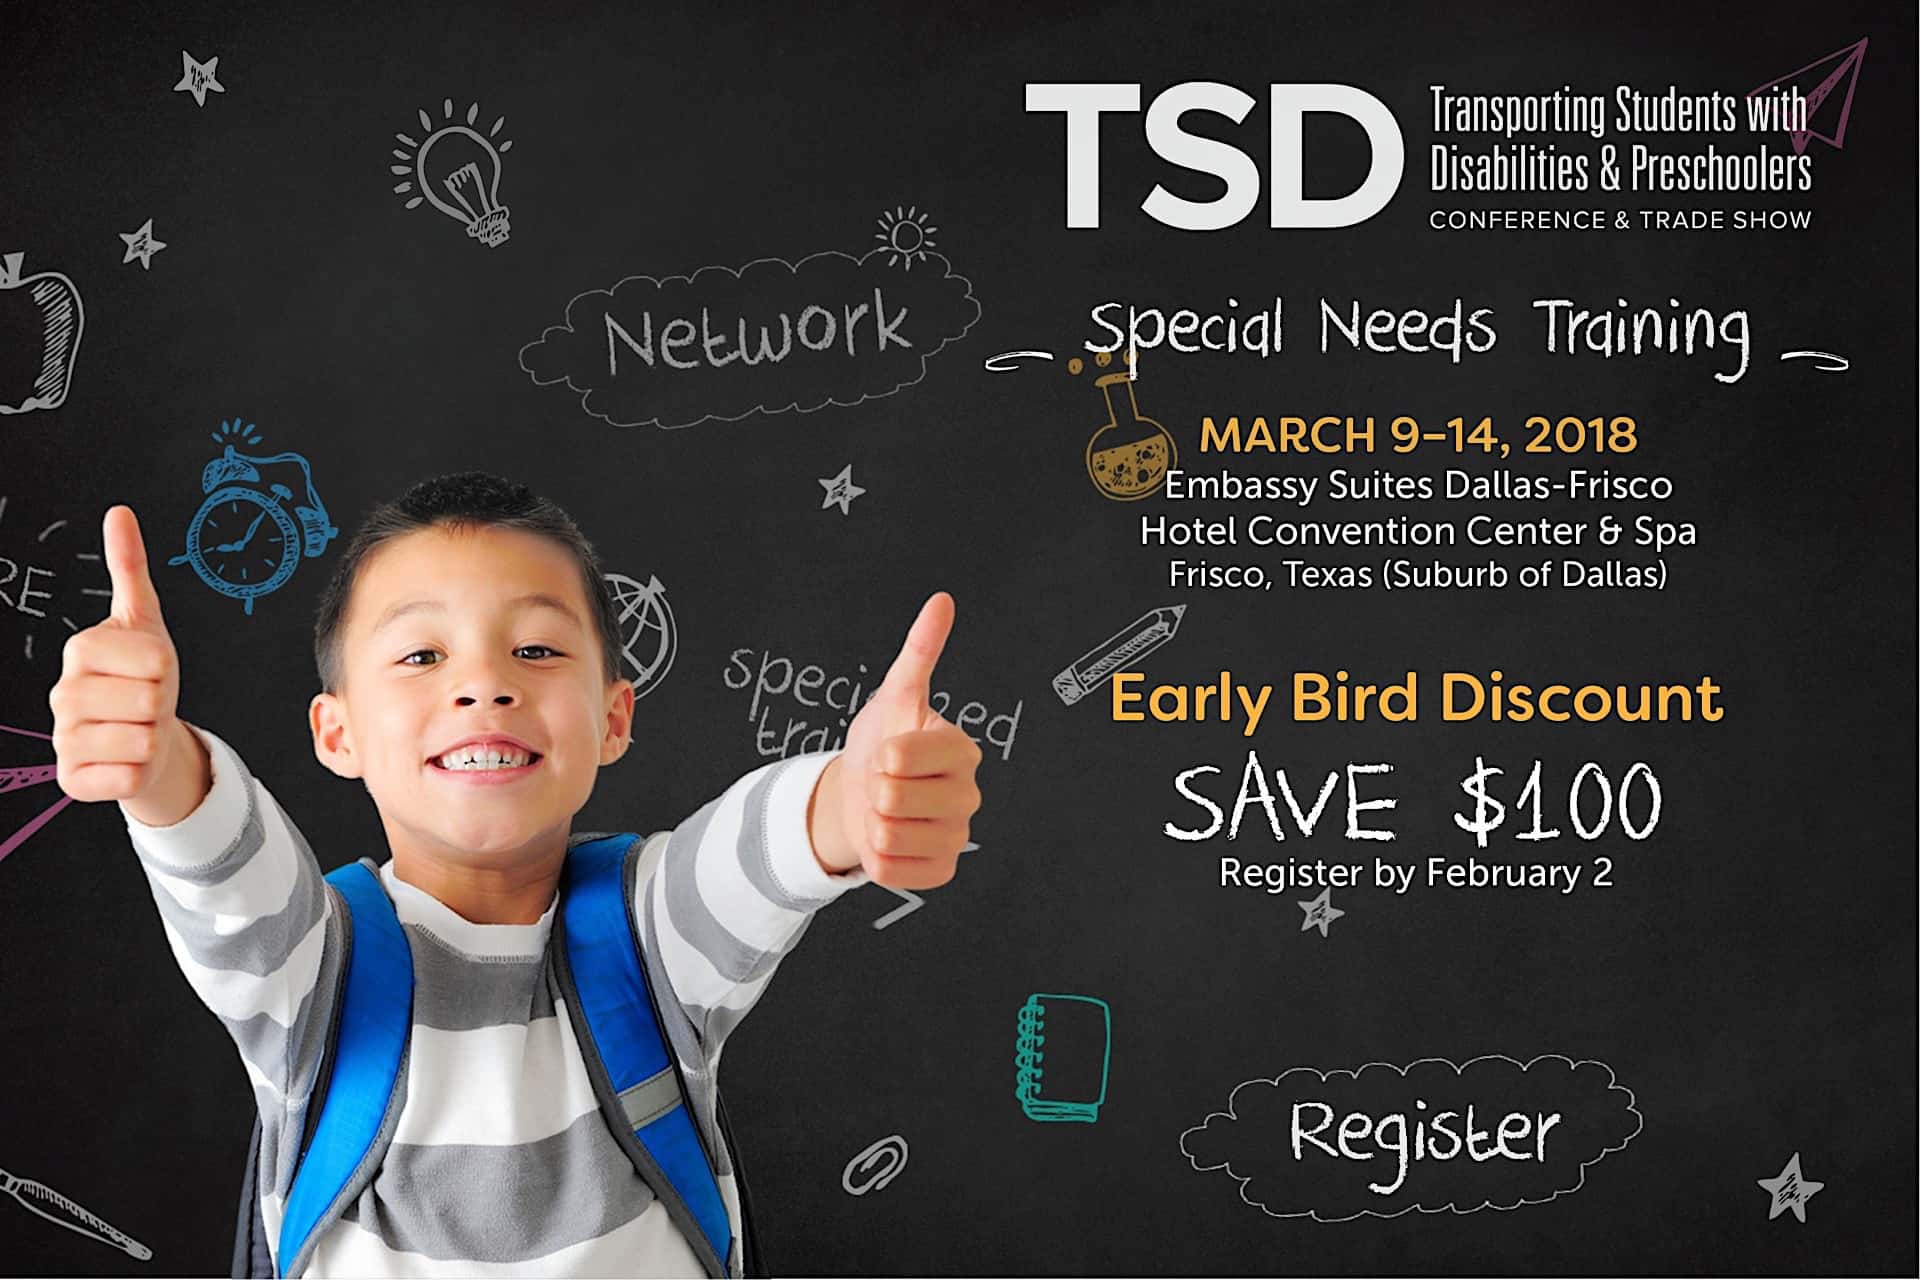 Updated TSD Conference Overview Online Features Details